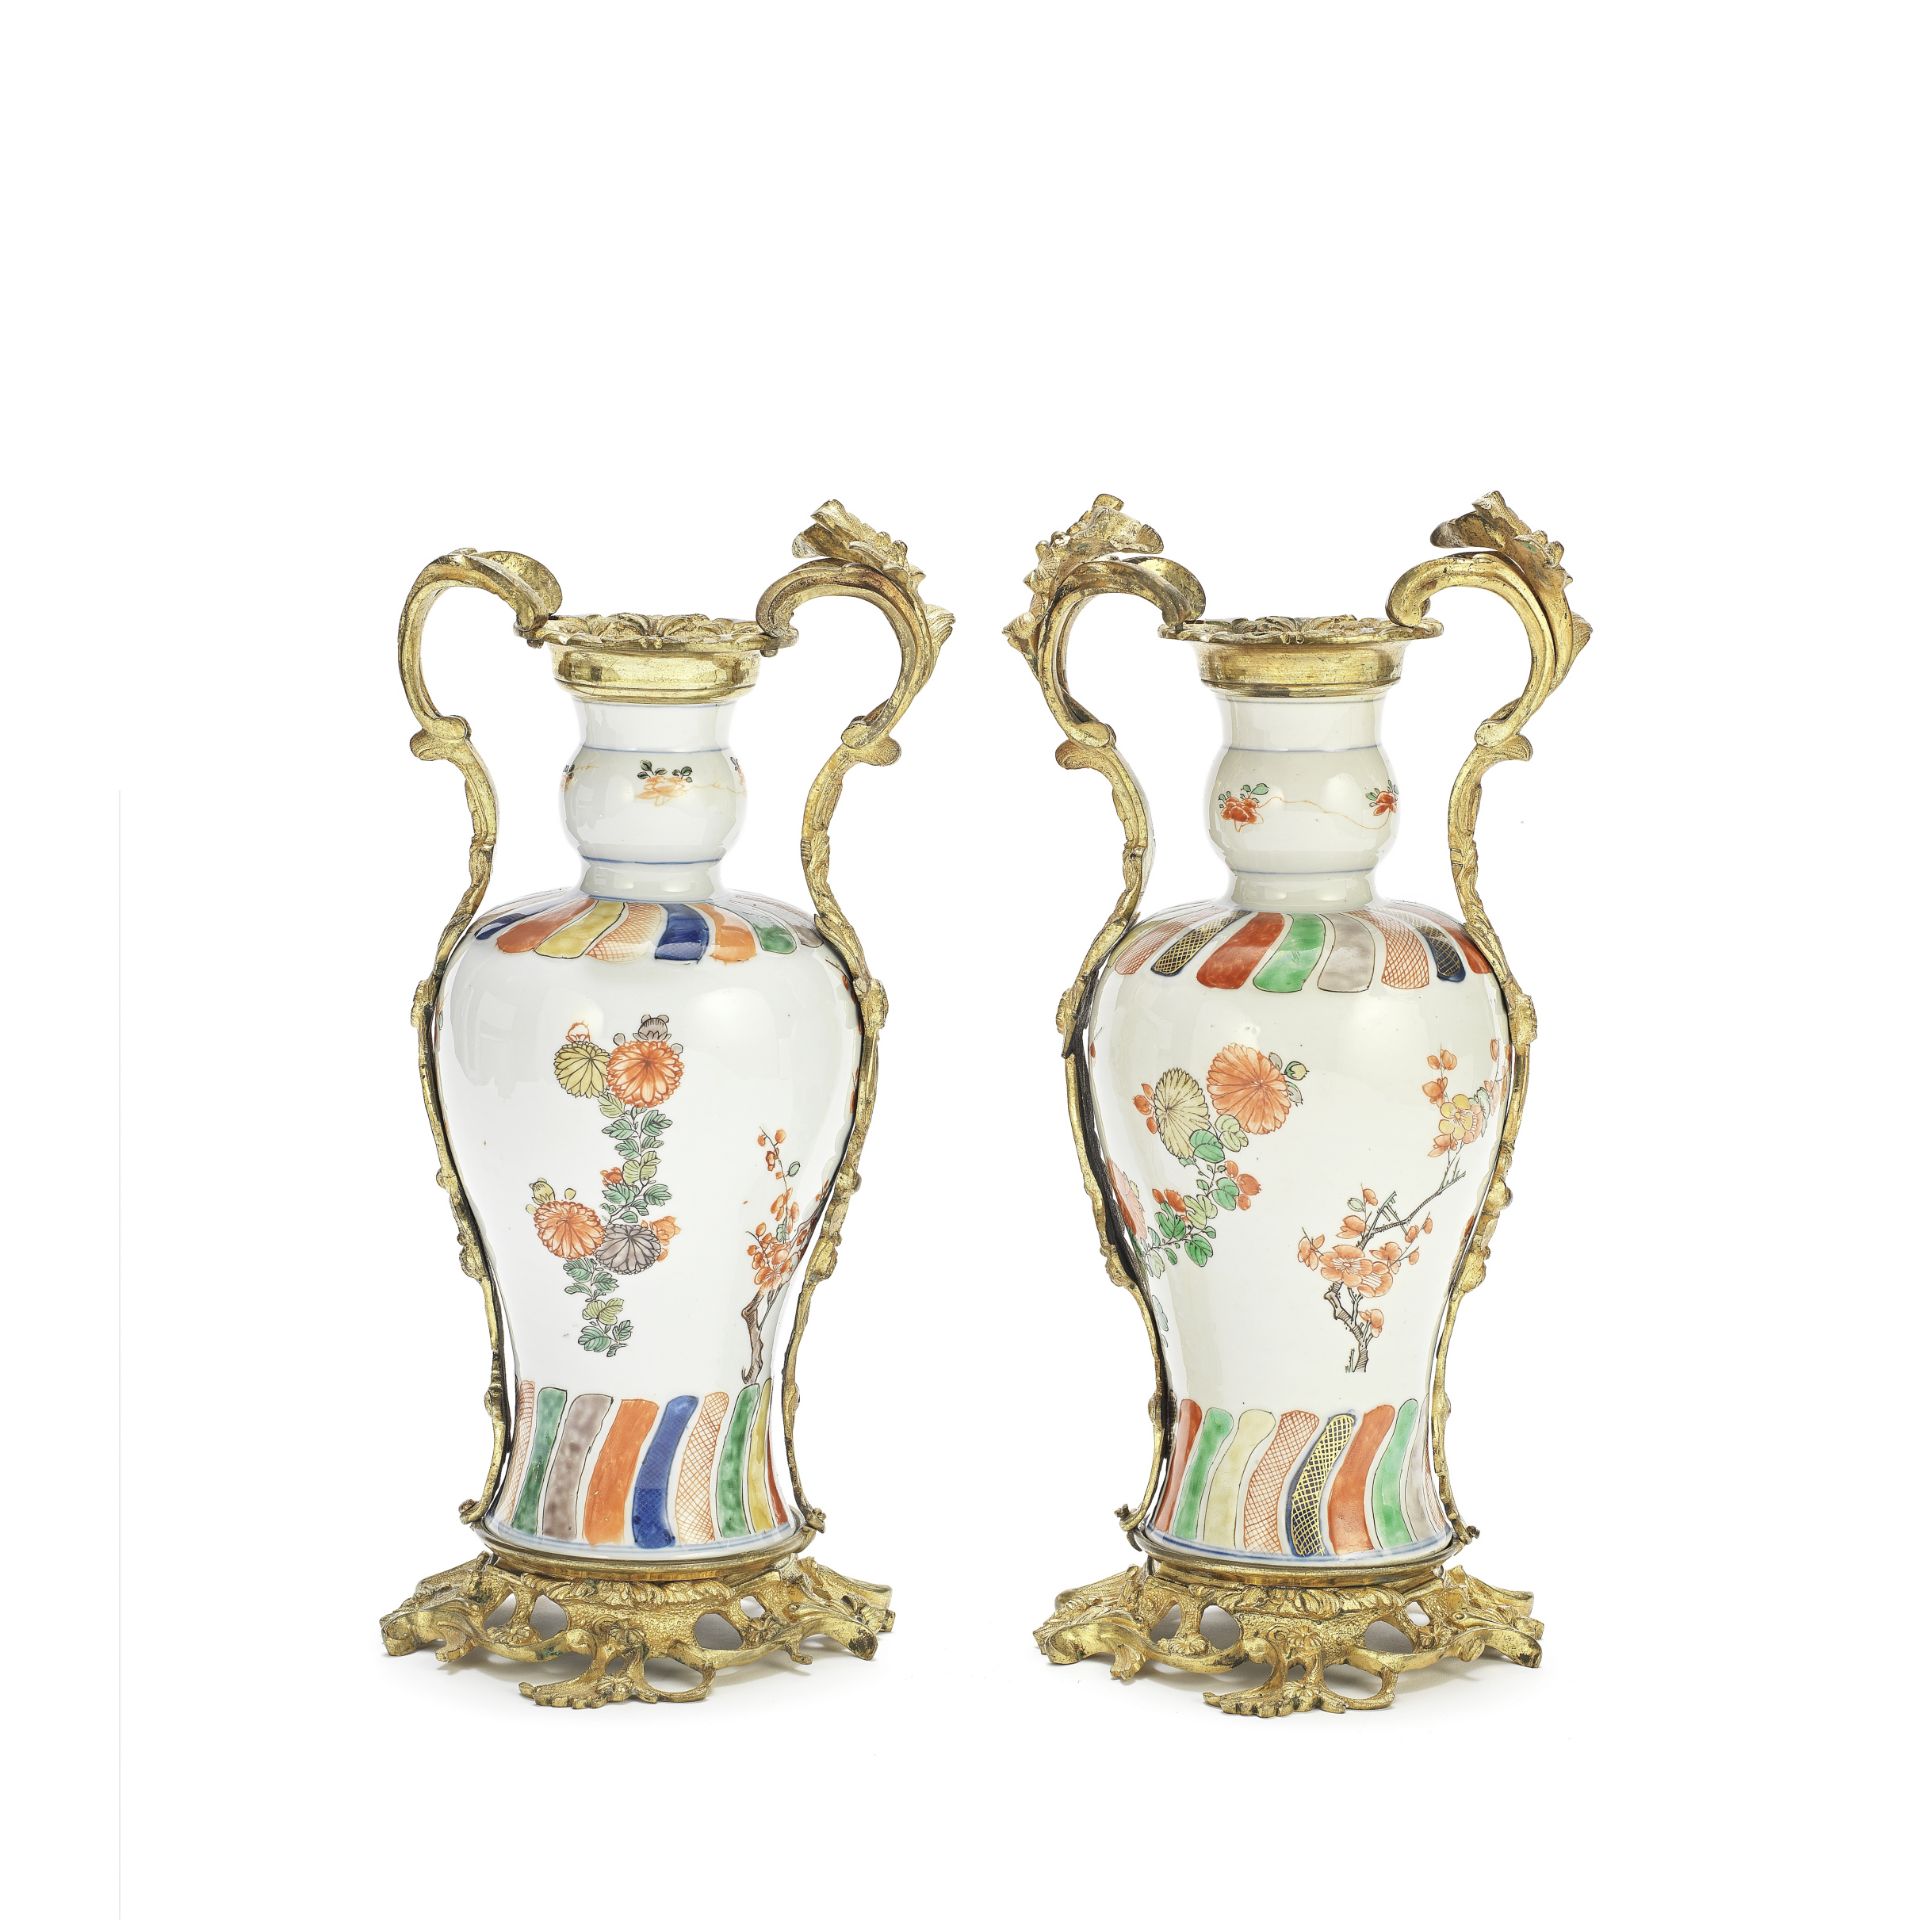 A PAIR OF UNUSUAL UNDERGLAZE BLUE AND ENAMELLED VASES WITH GILT BRONZE ROCOCO-STYLE MOUNTS The po...